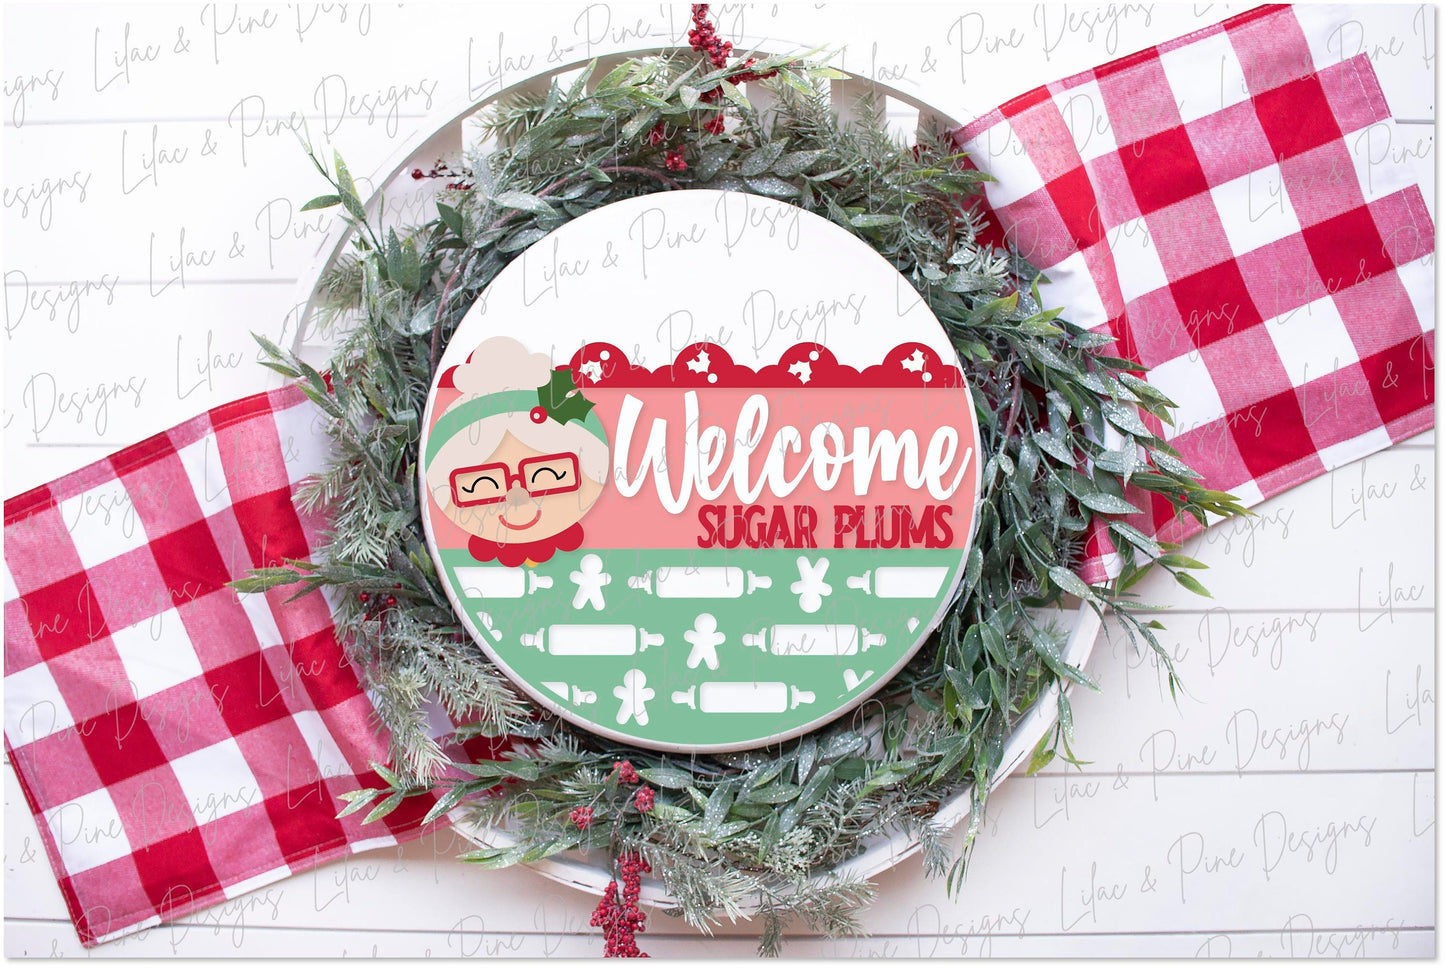 Welcome Sugar Plums SVG, Mrs Claus welcome sign SVG, Christmas door hanger SVG, Christmas welcome sign svg, Glowforge Svg, laser cut file